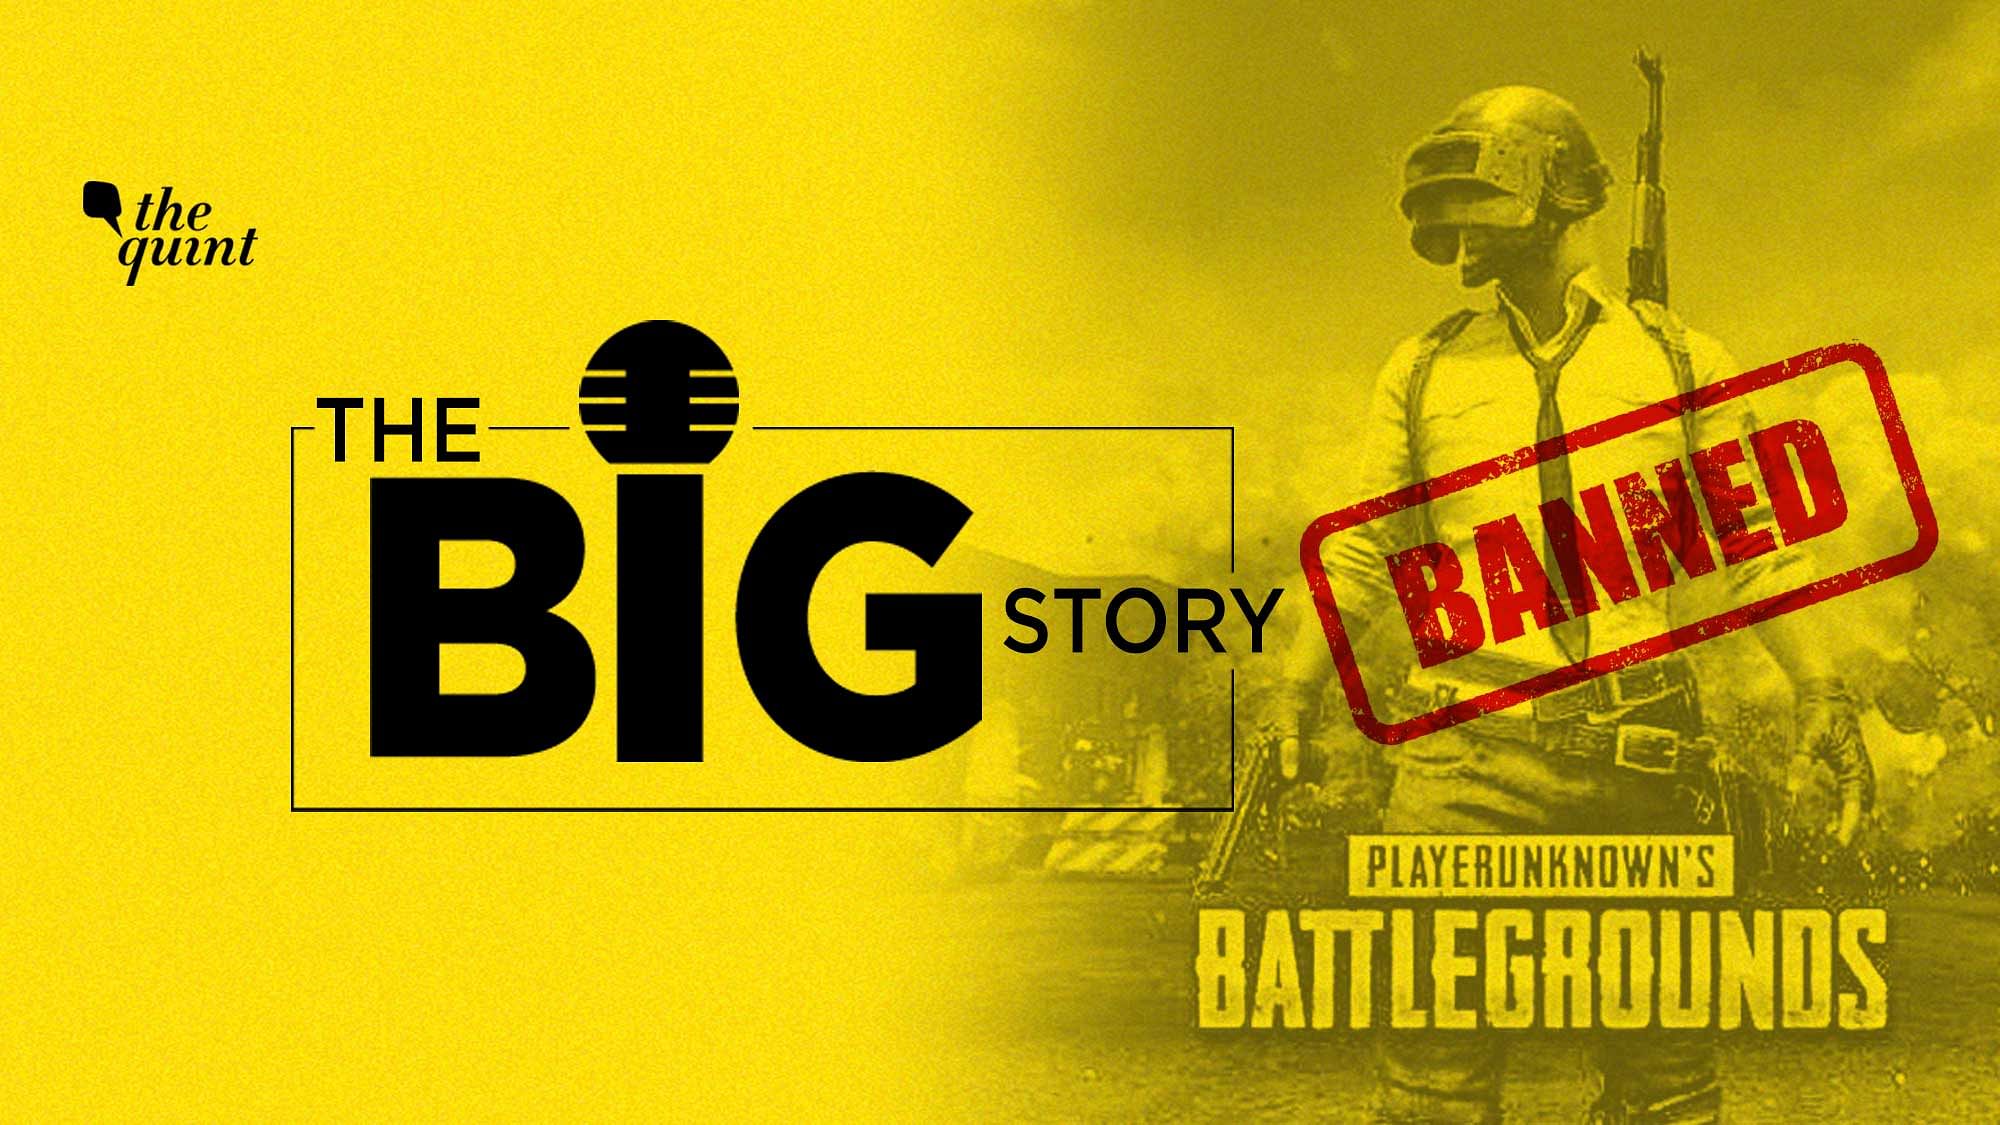 PubG Mobile that had many Indians hooked, is now banned along with 117 other China-based apps.